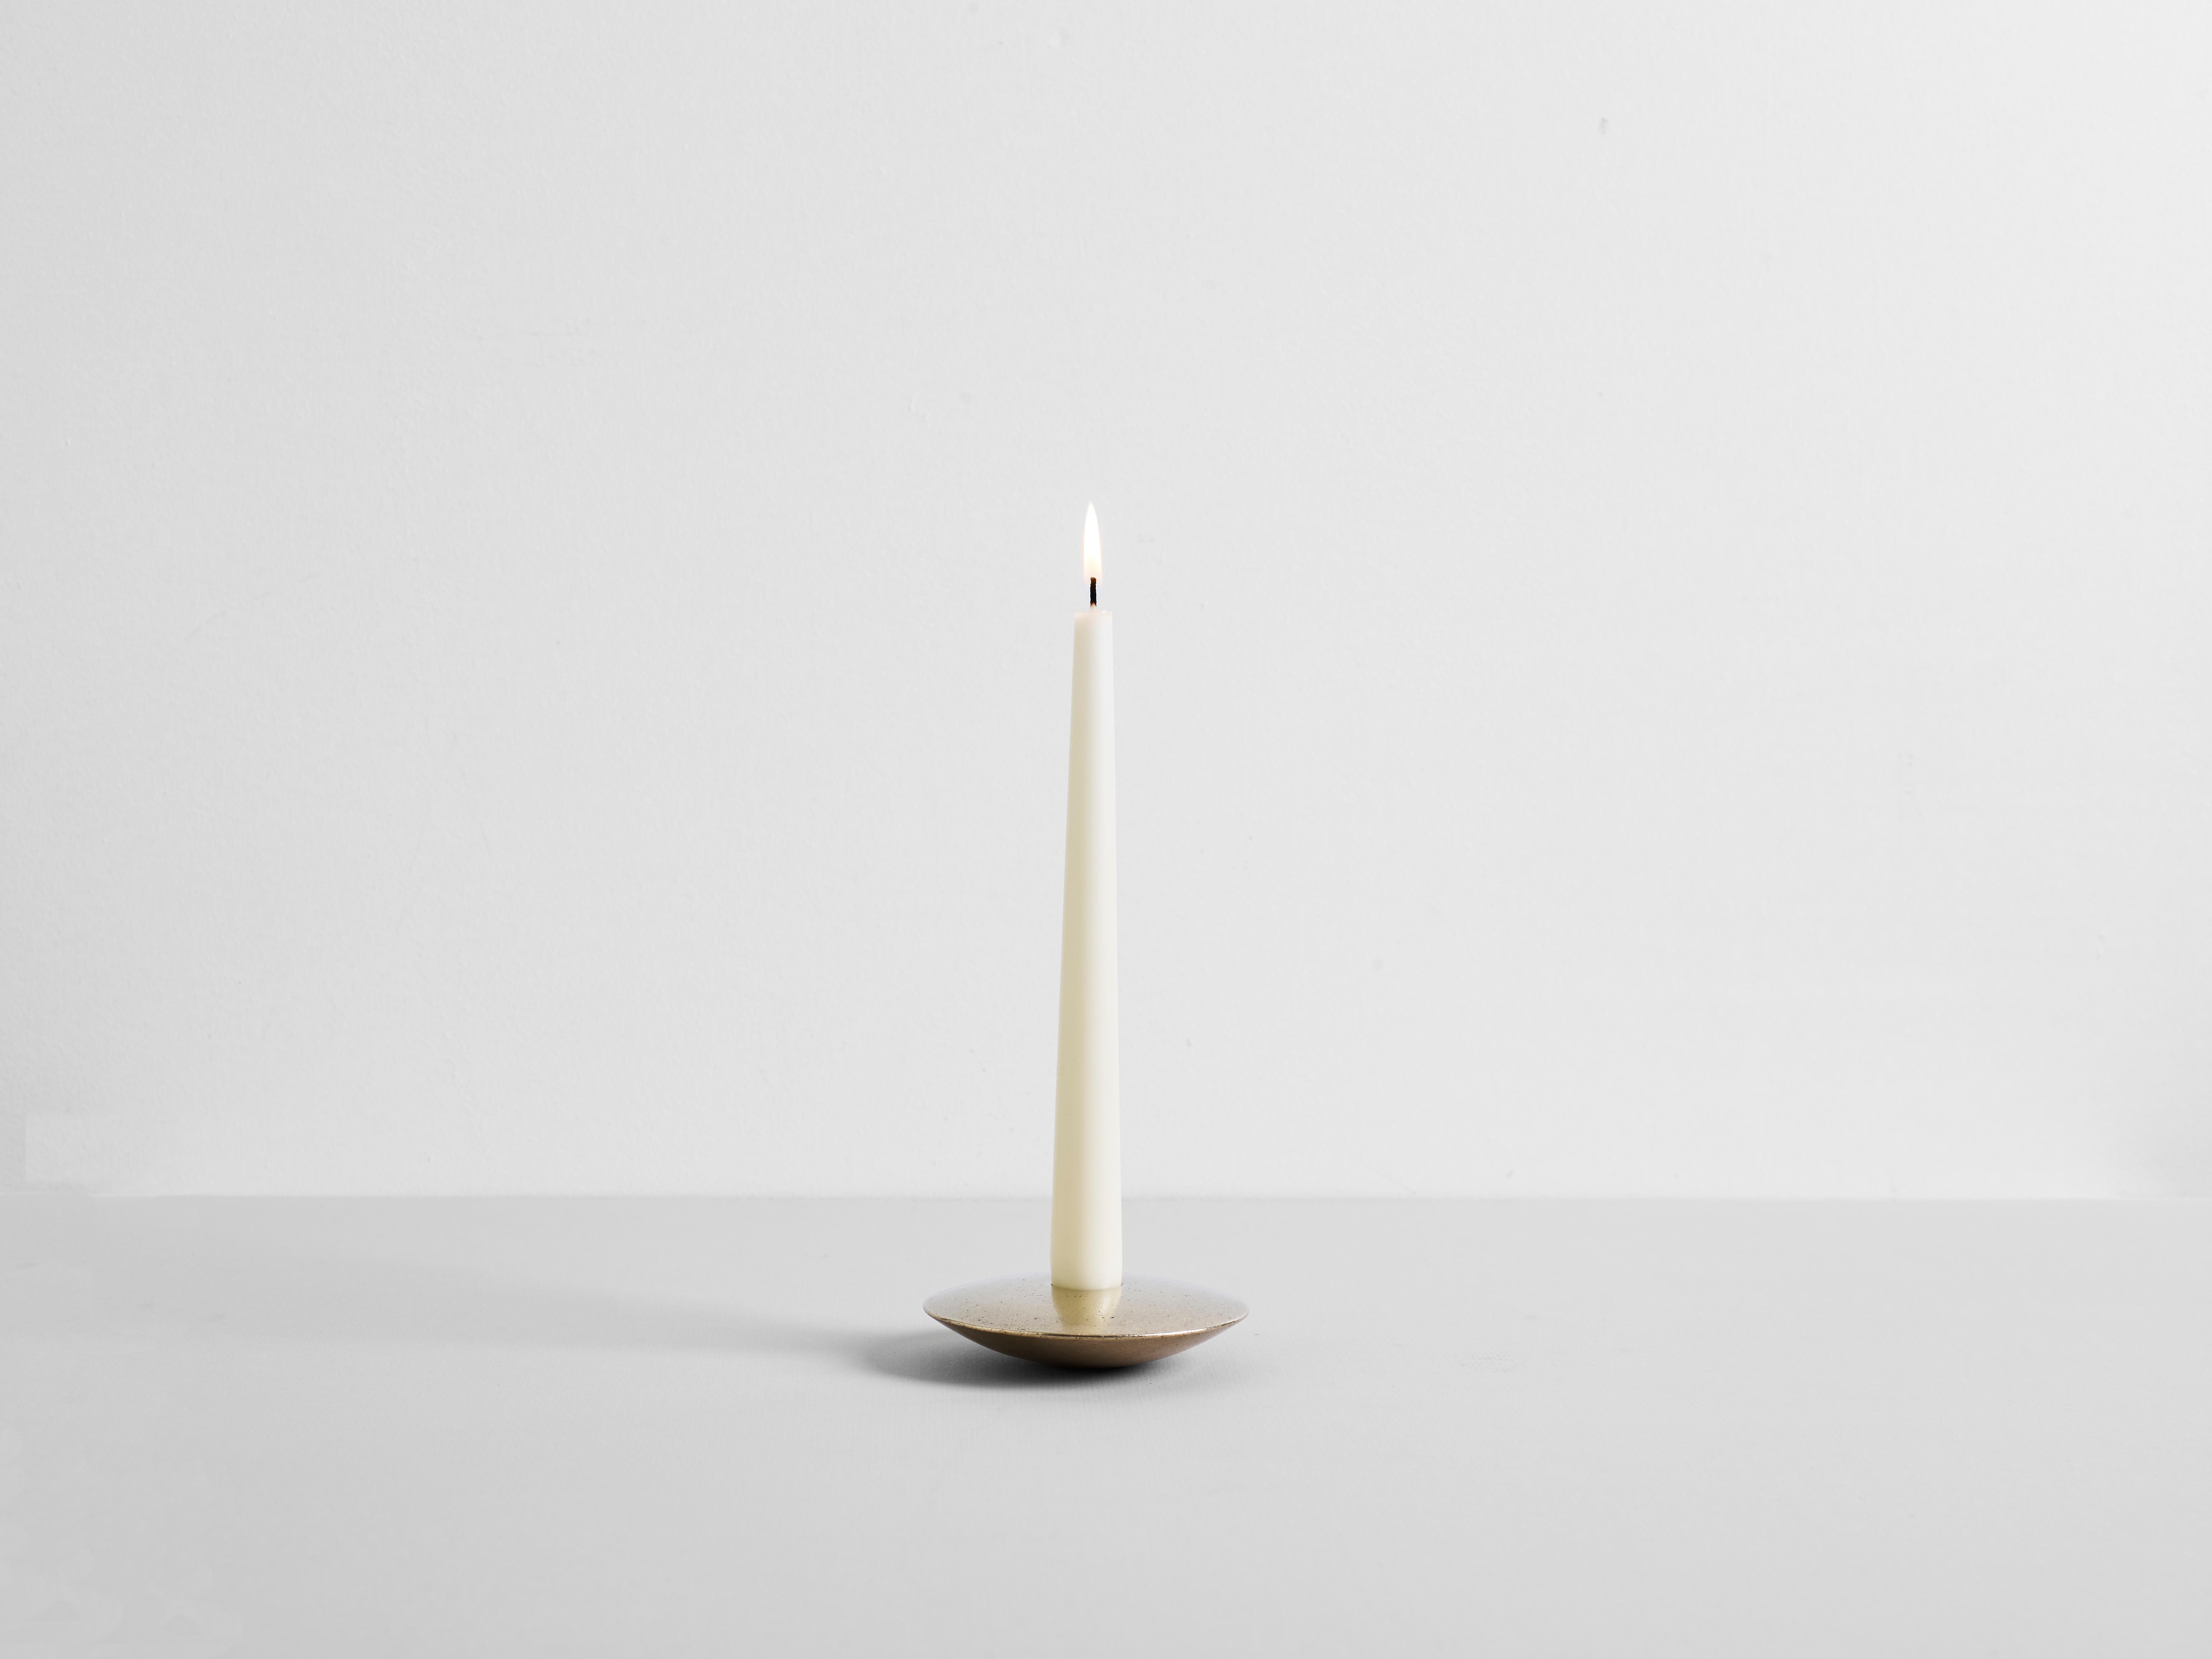 Ensemble of three contemporary brass candleholders - Henry Wilson.

Almendres candleholder is a solid, hand poured brass form with an almond shaped profile.

Almendres candleholder is manufactured in small batches, slight variations will occur